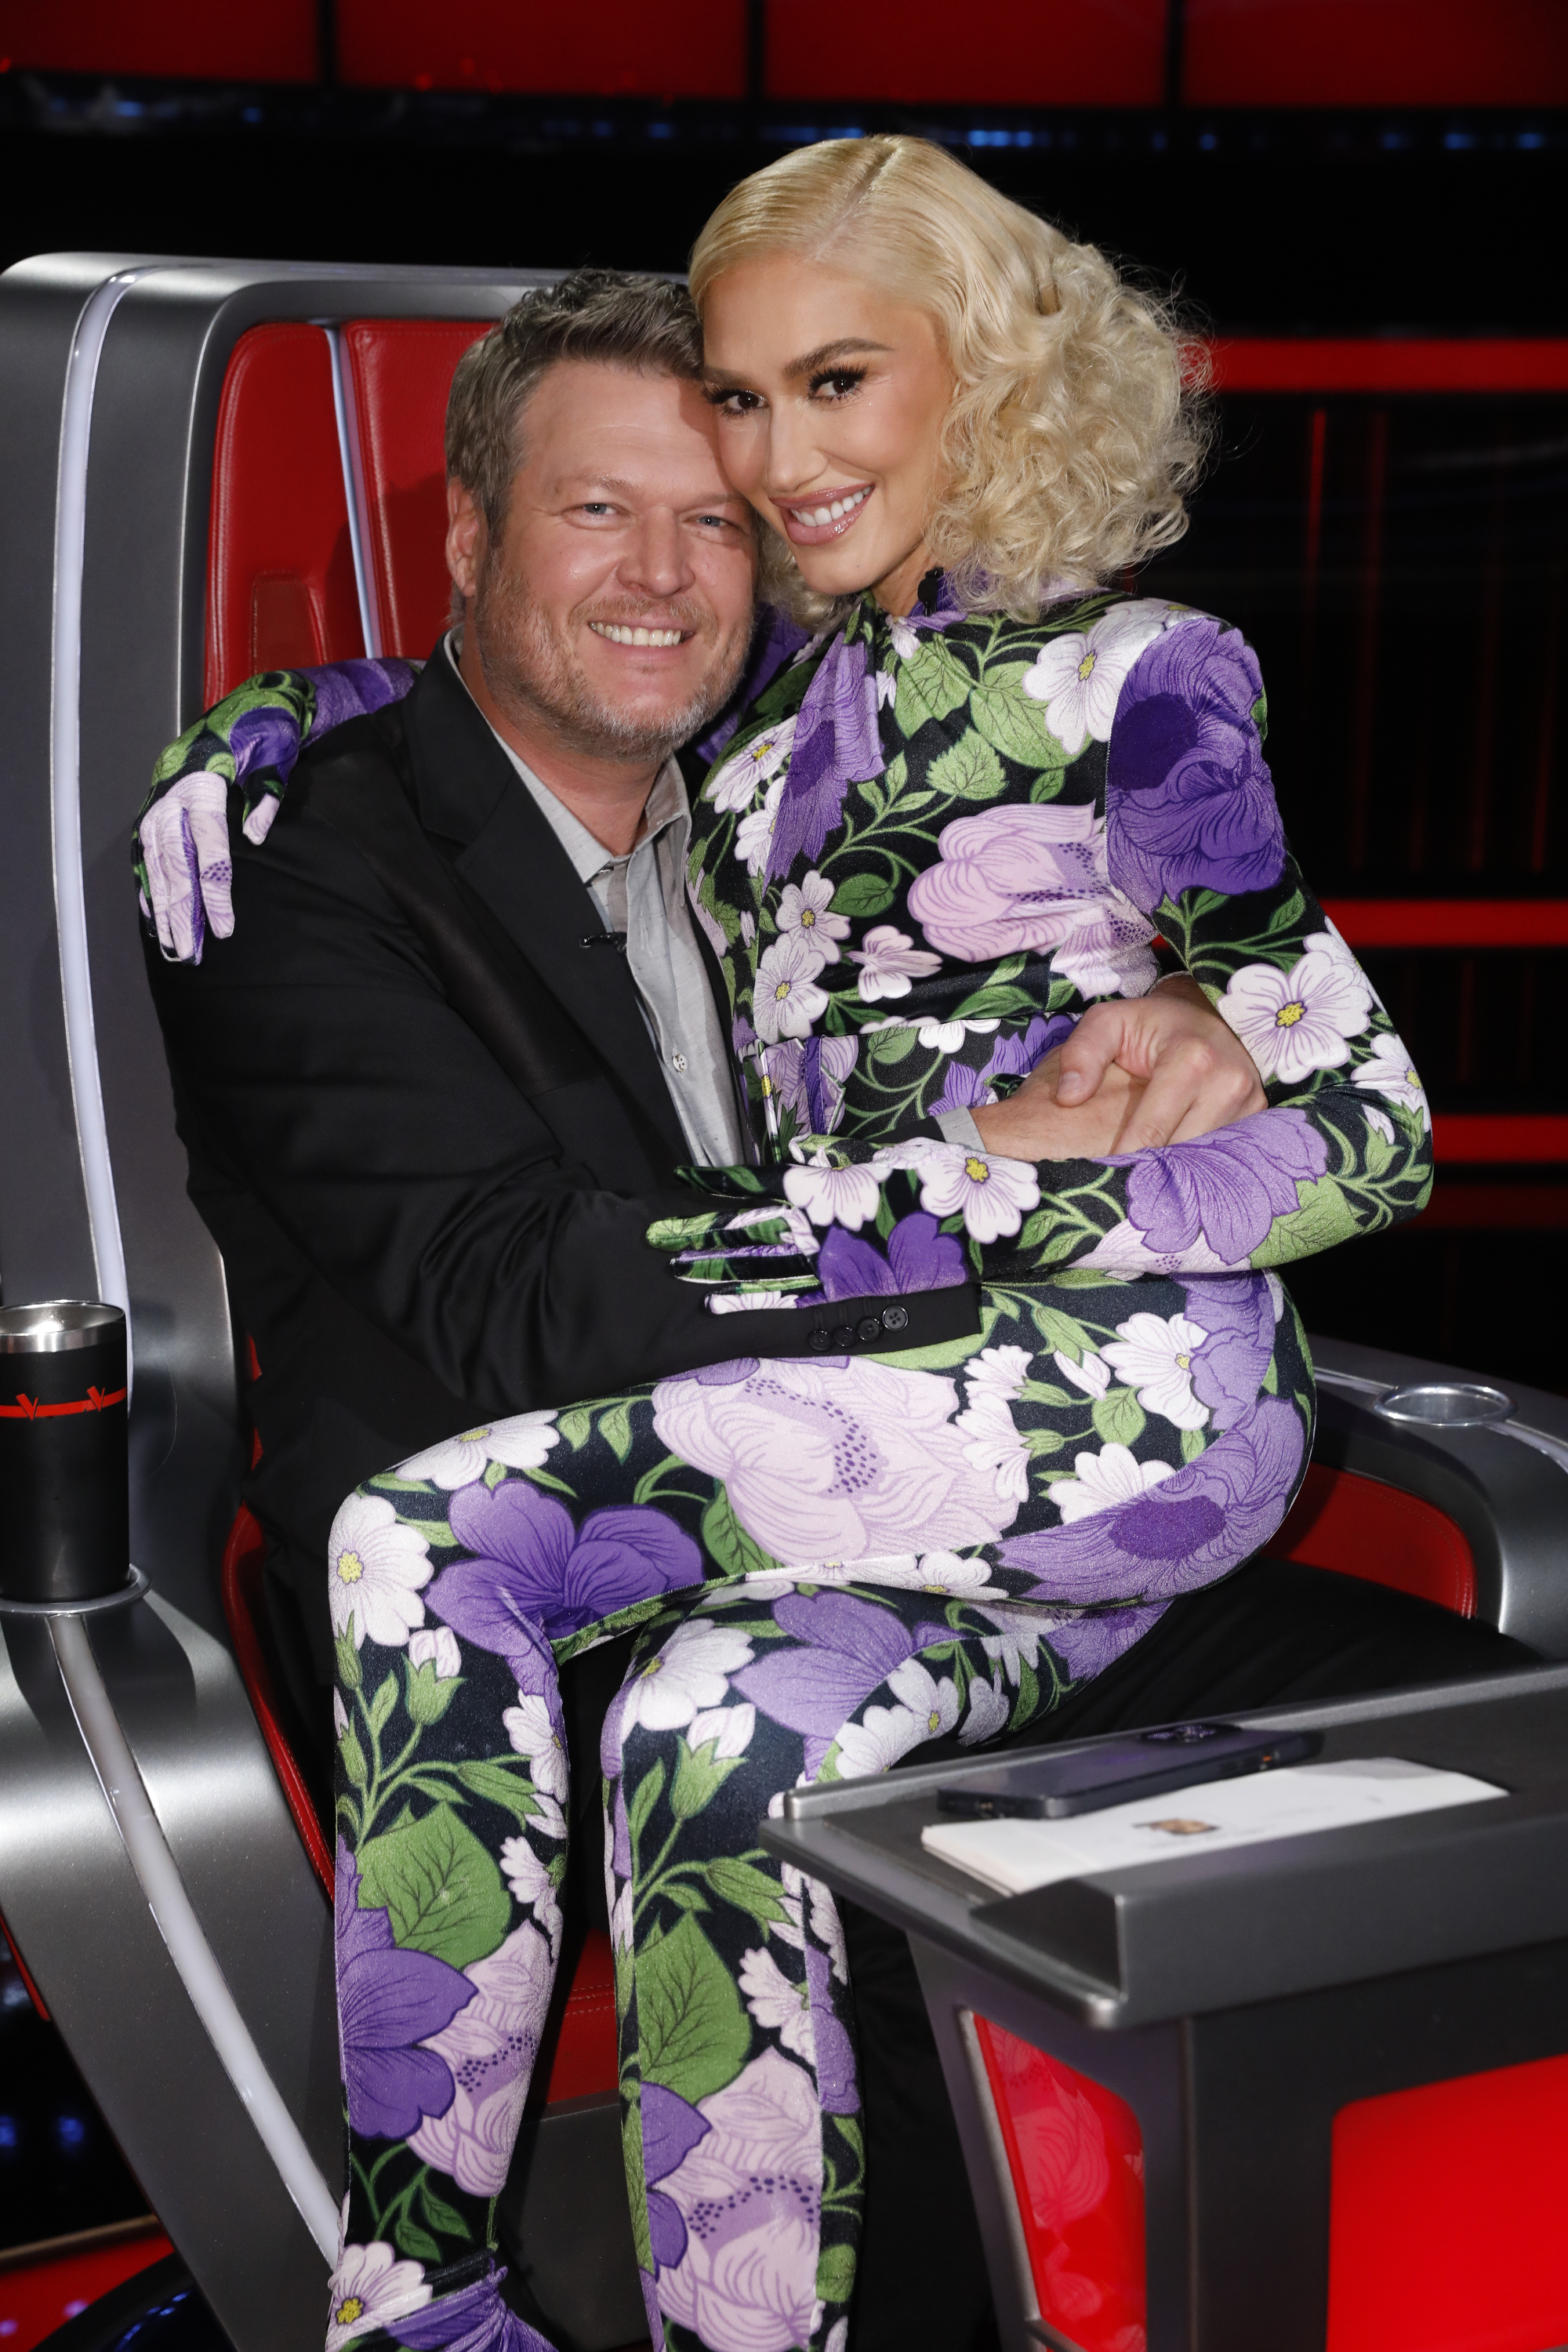 The couple - who met on The Voice - married in 2021